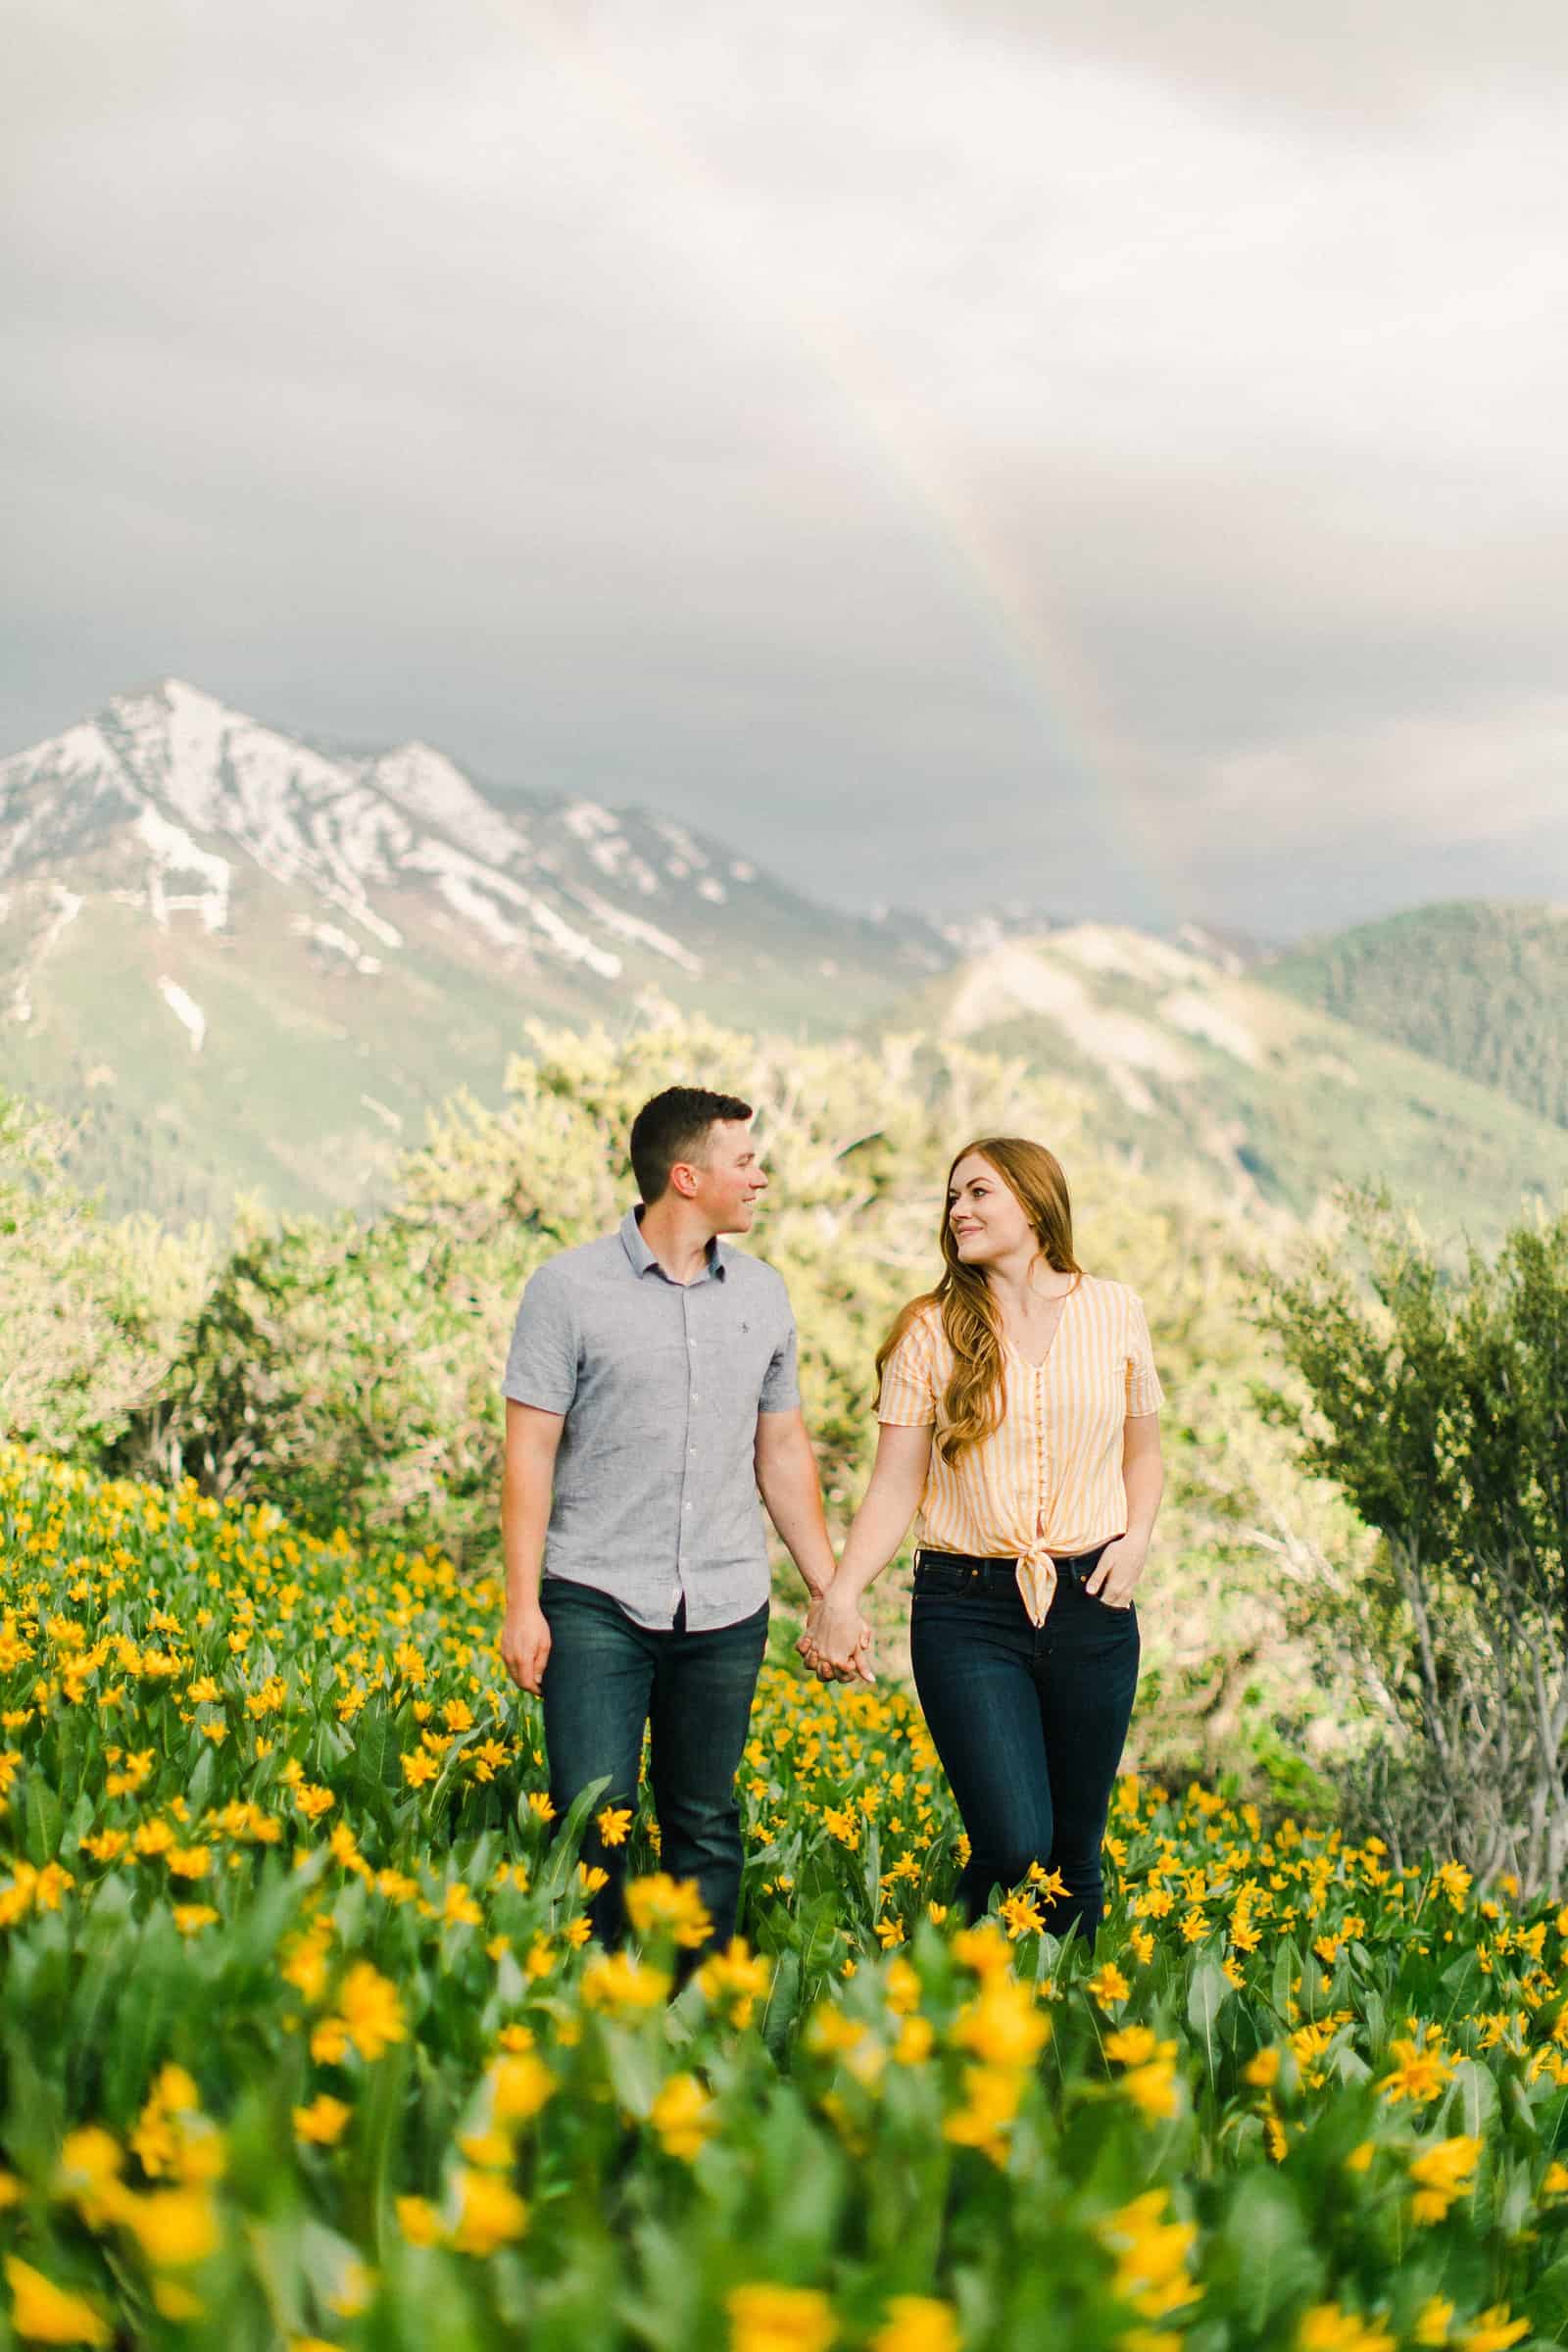 Provo Canyon wildflowers field engagement session, Utah wedding photography, engaged couple walking in yellow flowers and mountains with rainbow in background